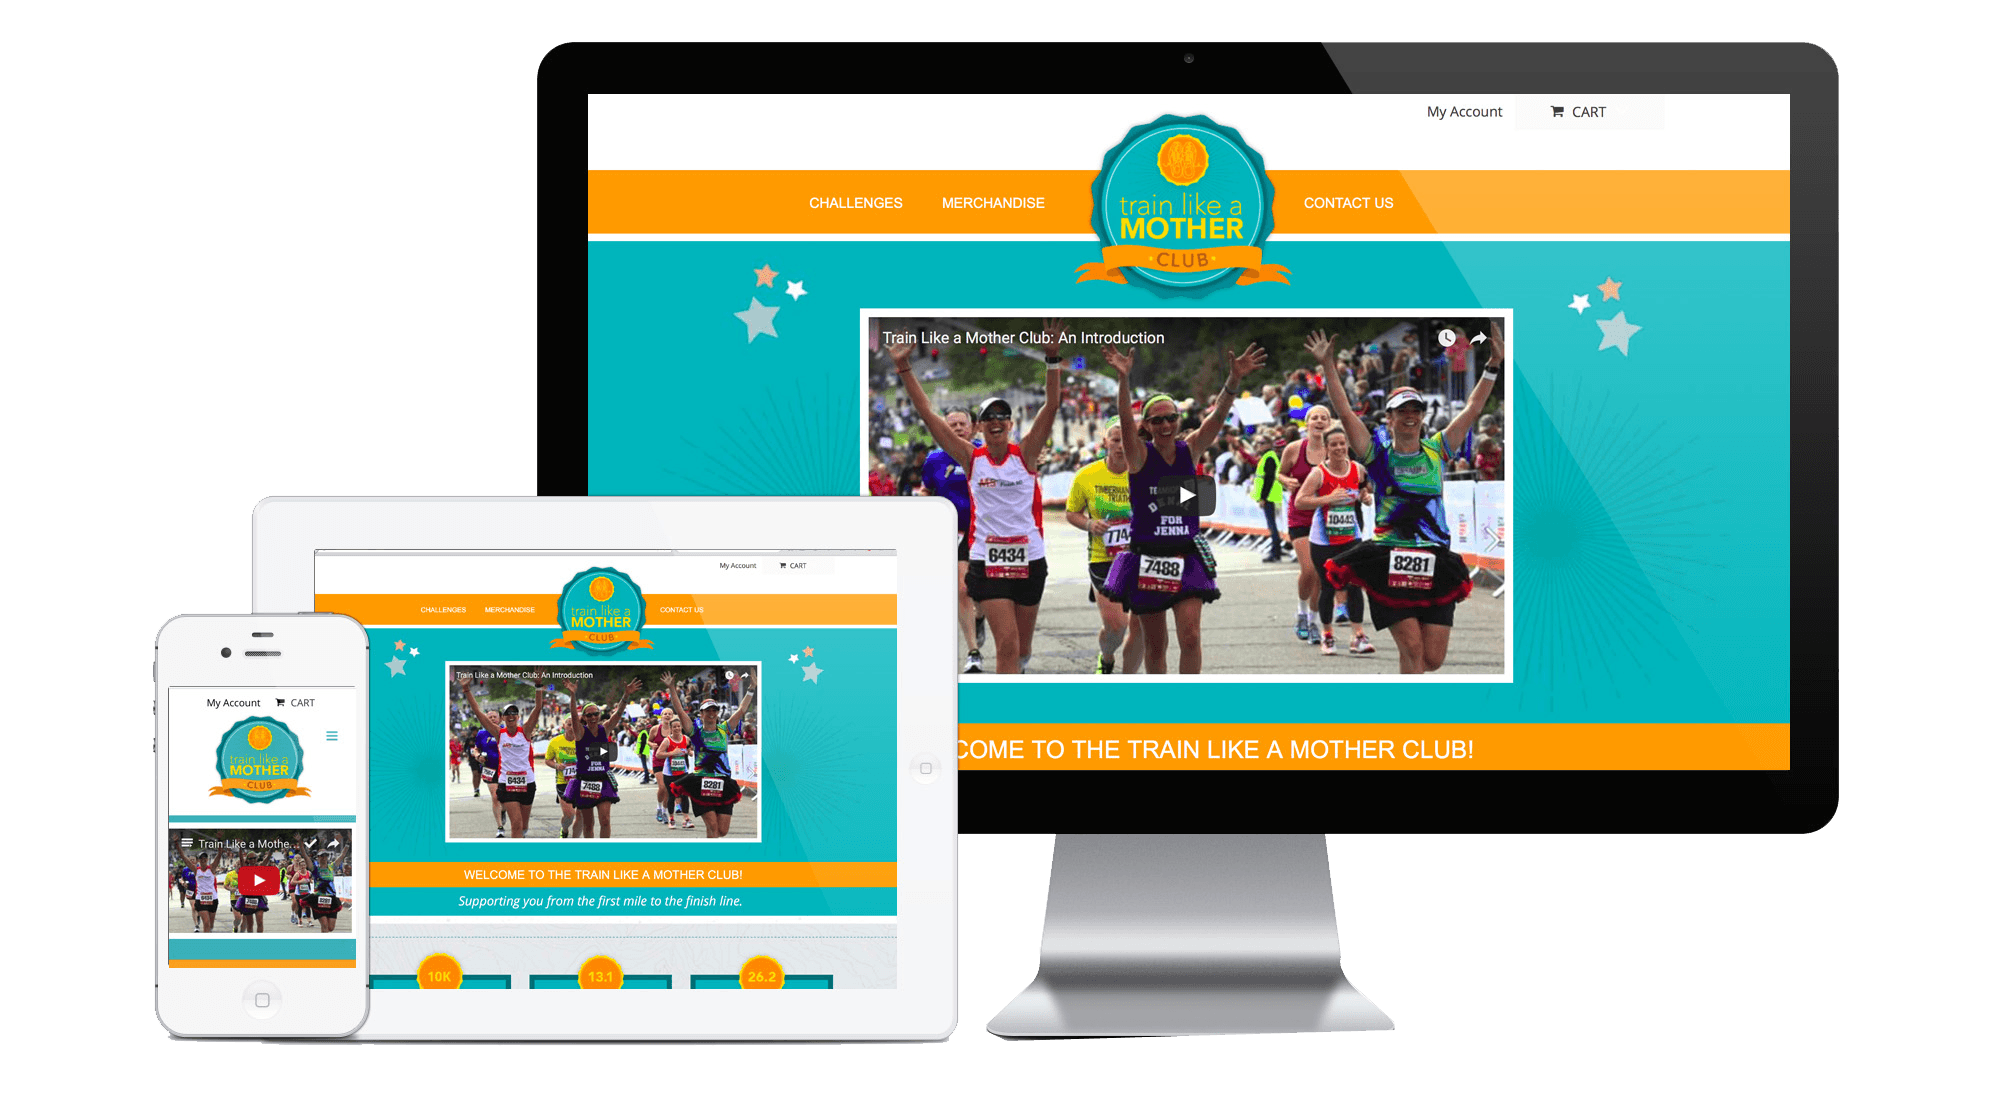 Train Like a MOTHER Club is an amazing support system for moms who like to run. Whether you’re training for a 5k or a marathon, this new website offers flexible ......
READ MORE